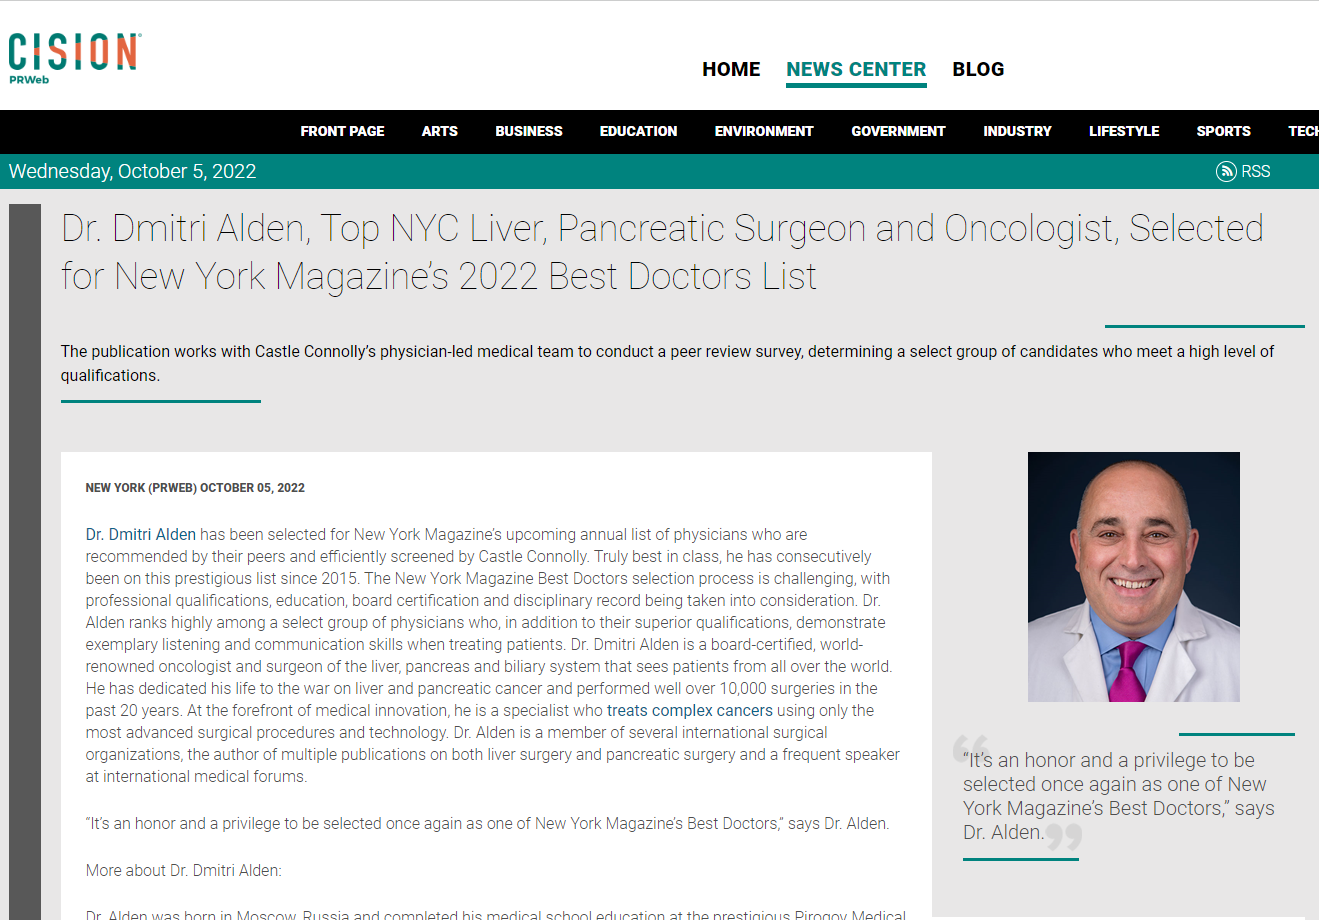 screenshot of the article titled: Dr. Dmitri Alden, Top NYC Liver, Pancreatic Surgeon and Oncologist, Selected for New York Magazine’s 2022 Best Doctors List